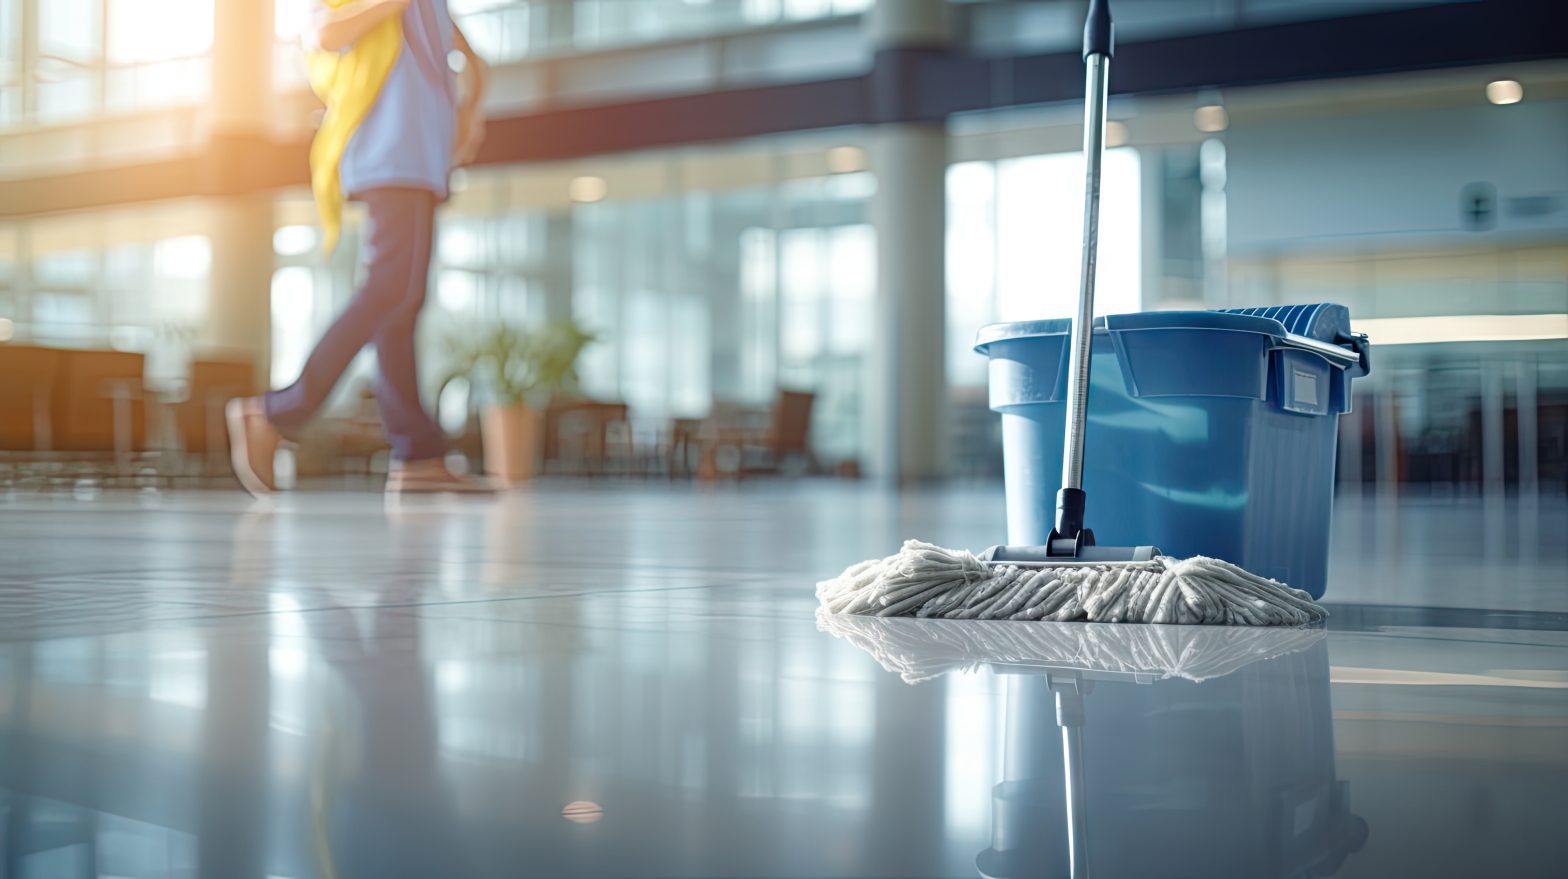 Concept of mopping floor of public business with possible slip and fall accident and turning to Premises Liability Injury Lawyer Norfolk.